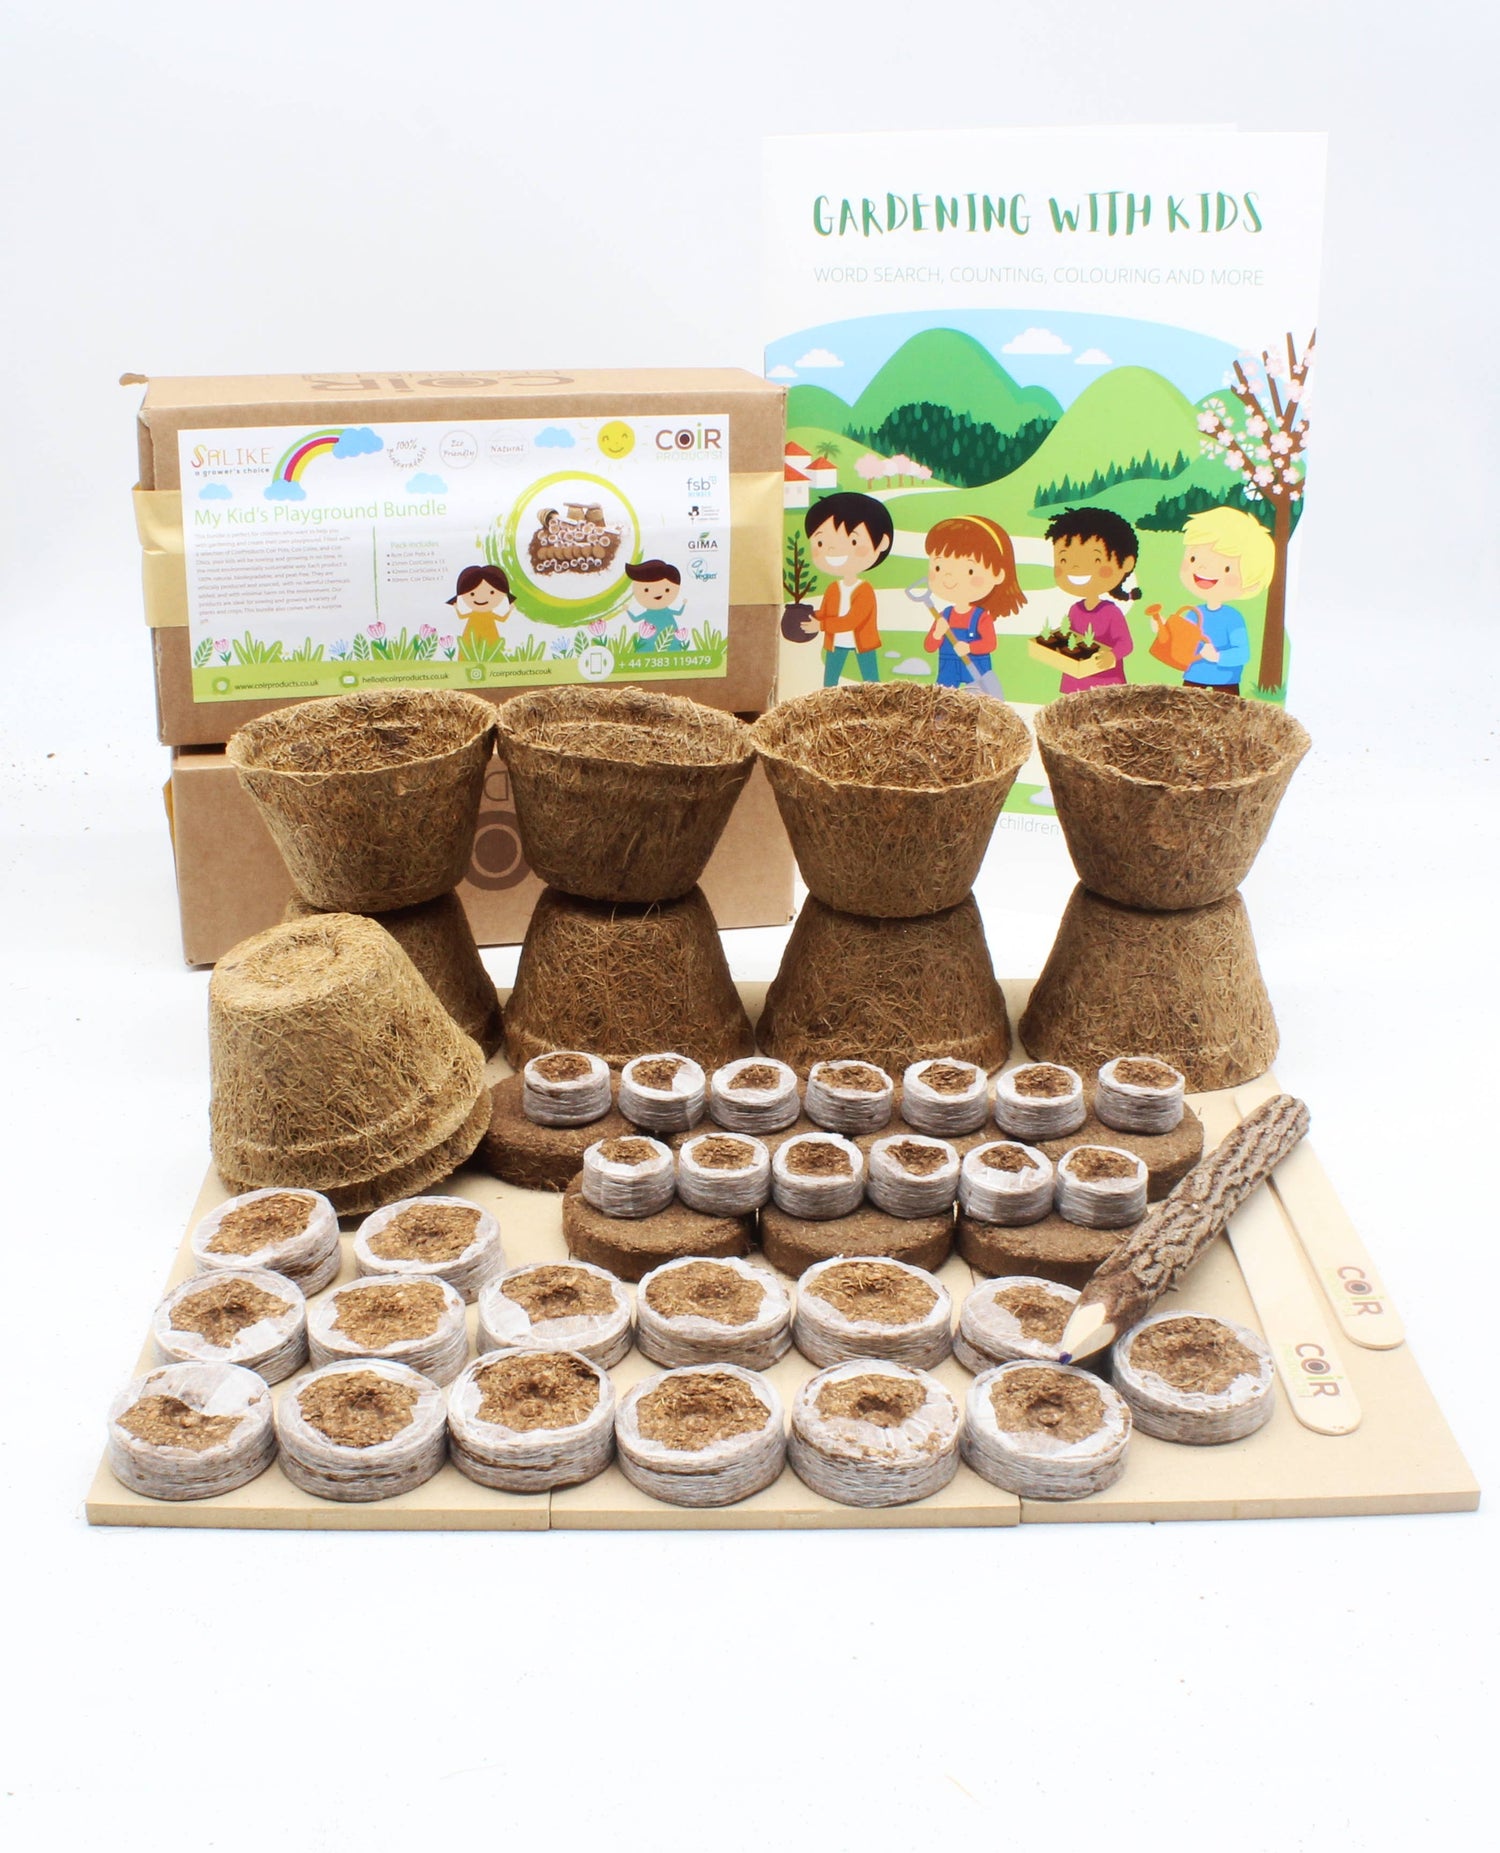  CoirProducts My Kid’s Playground | Gardening for Kids CPMKP The Green Thumb Club